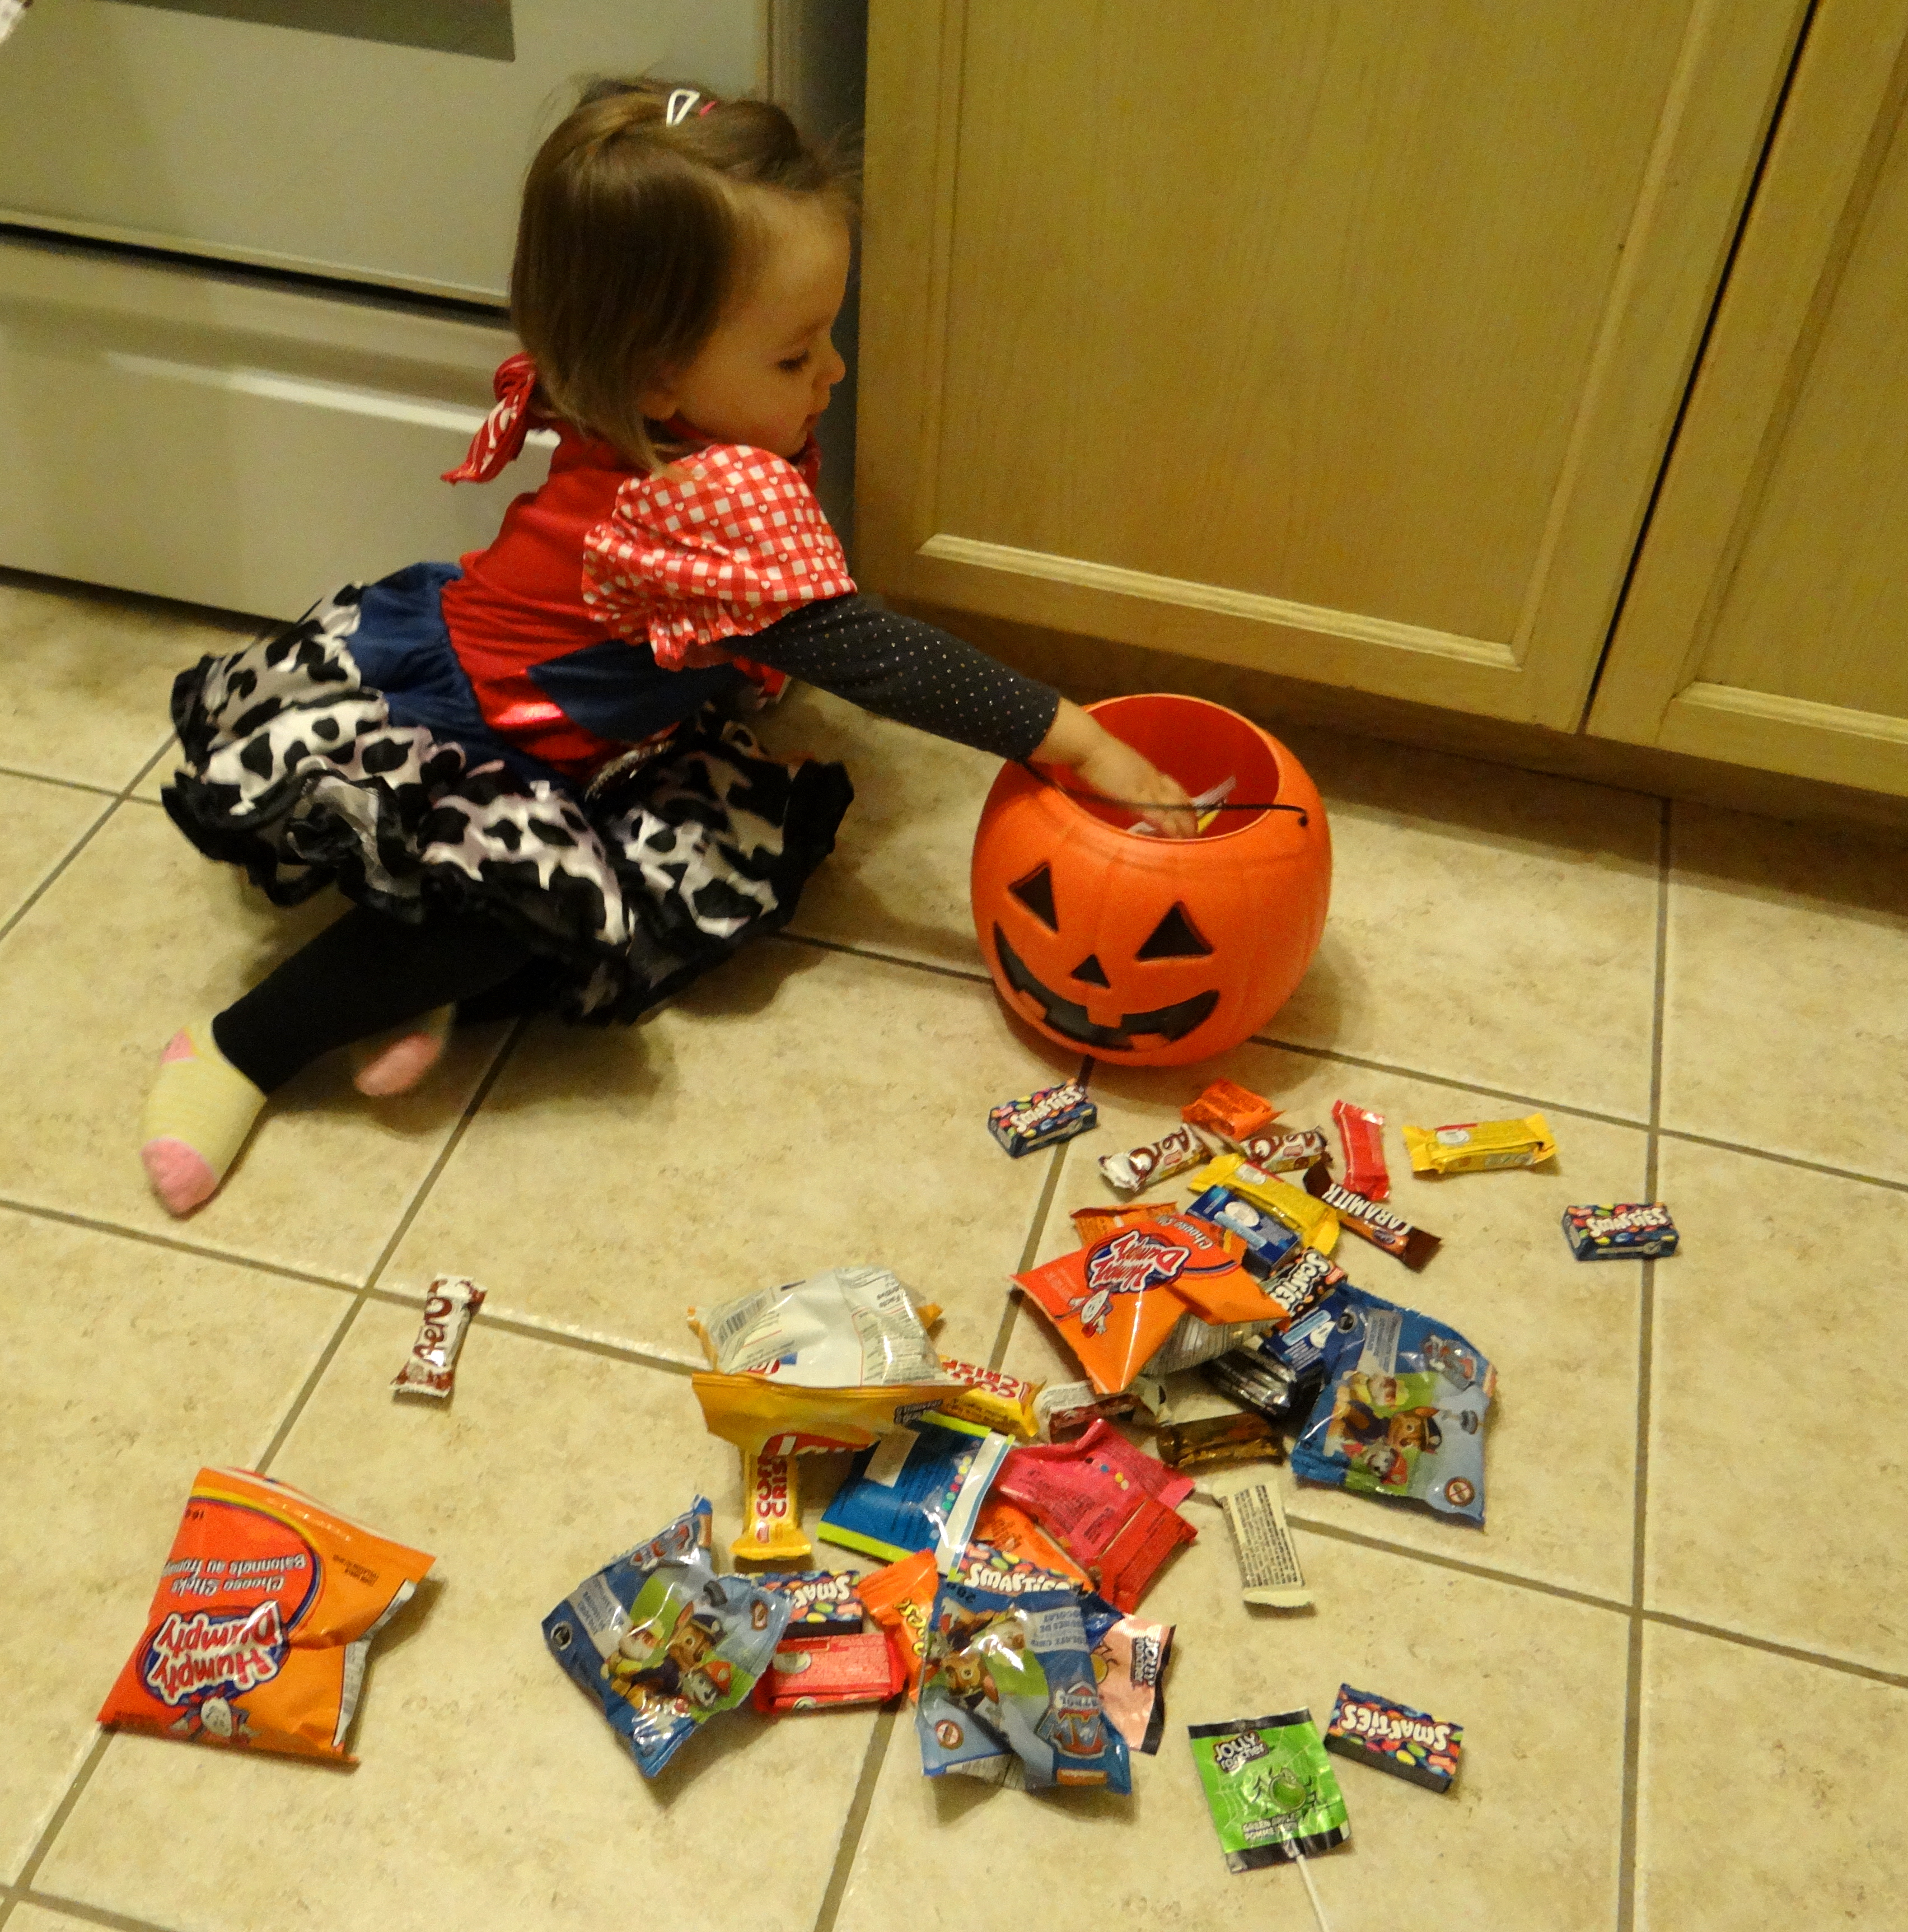 Peachy with her Halloween loot